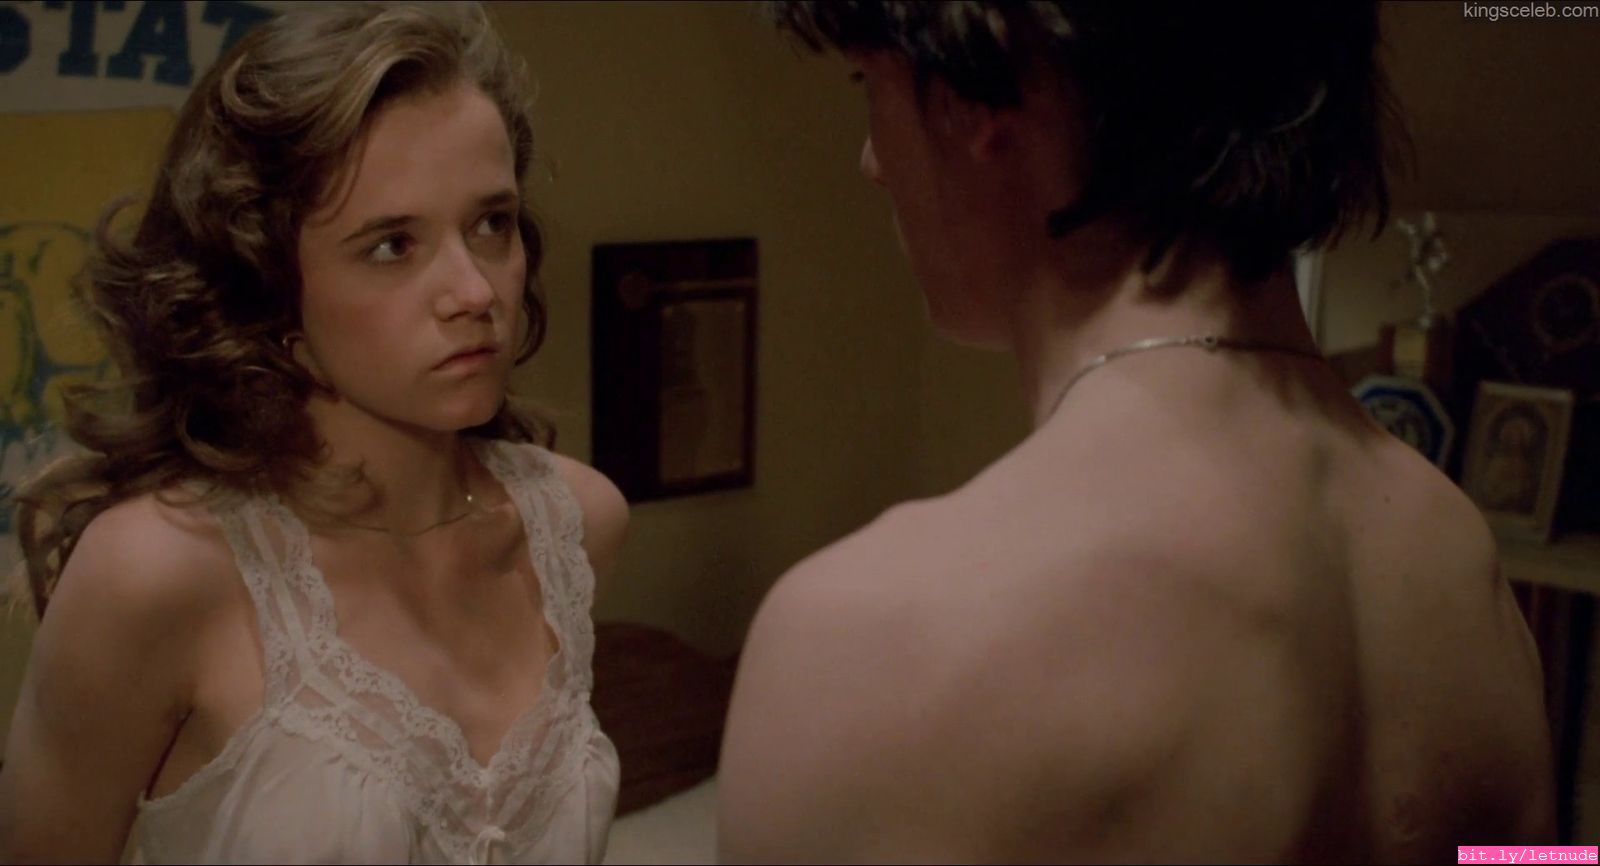 Lea thompson nude pictures